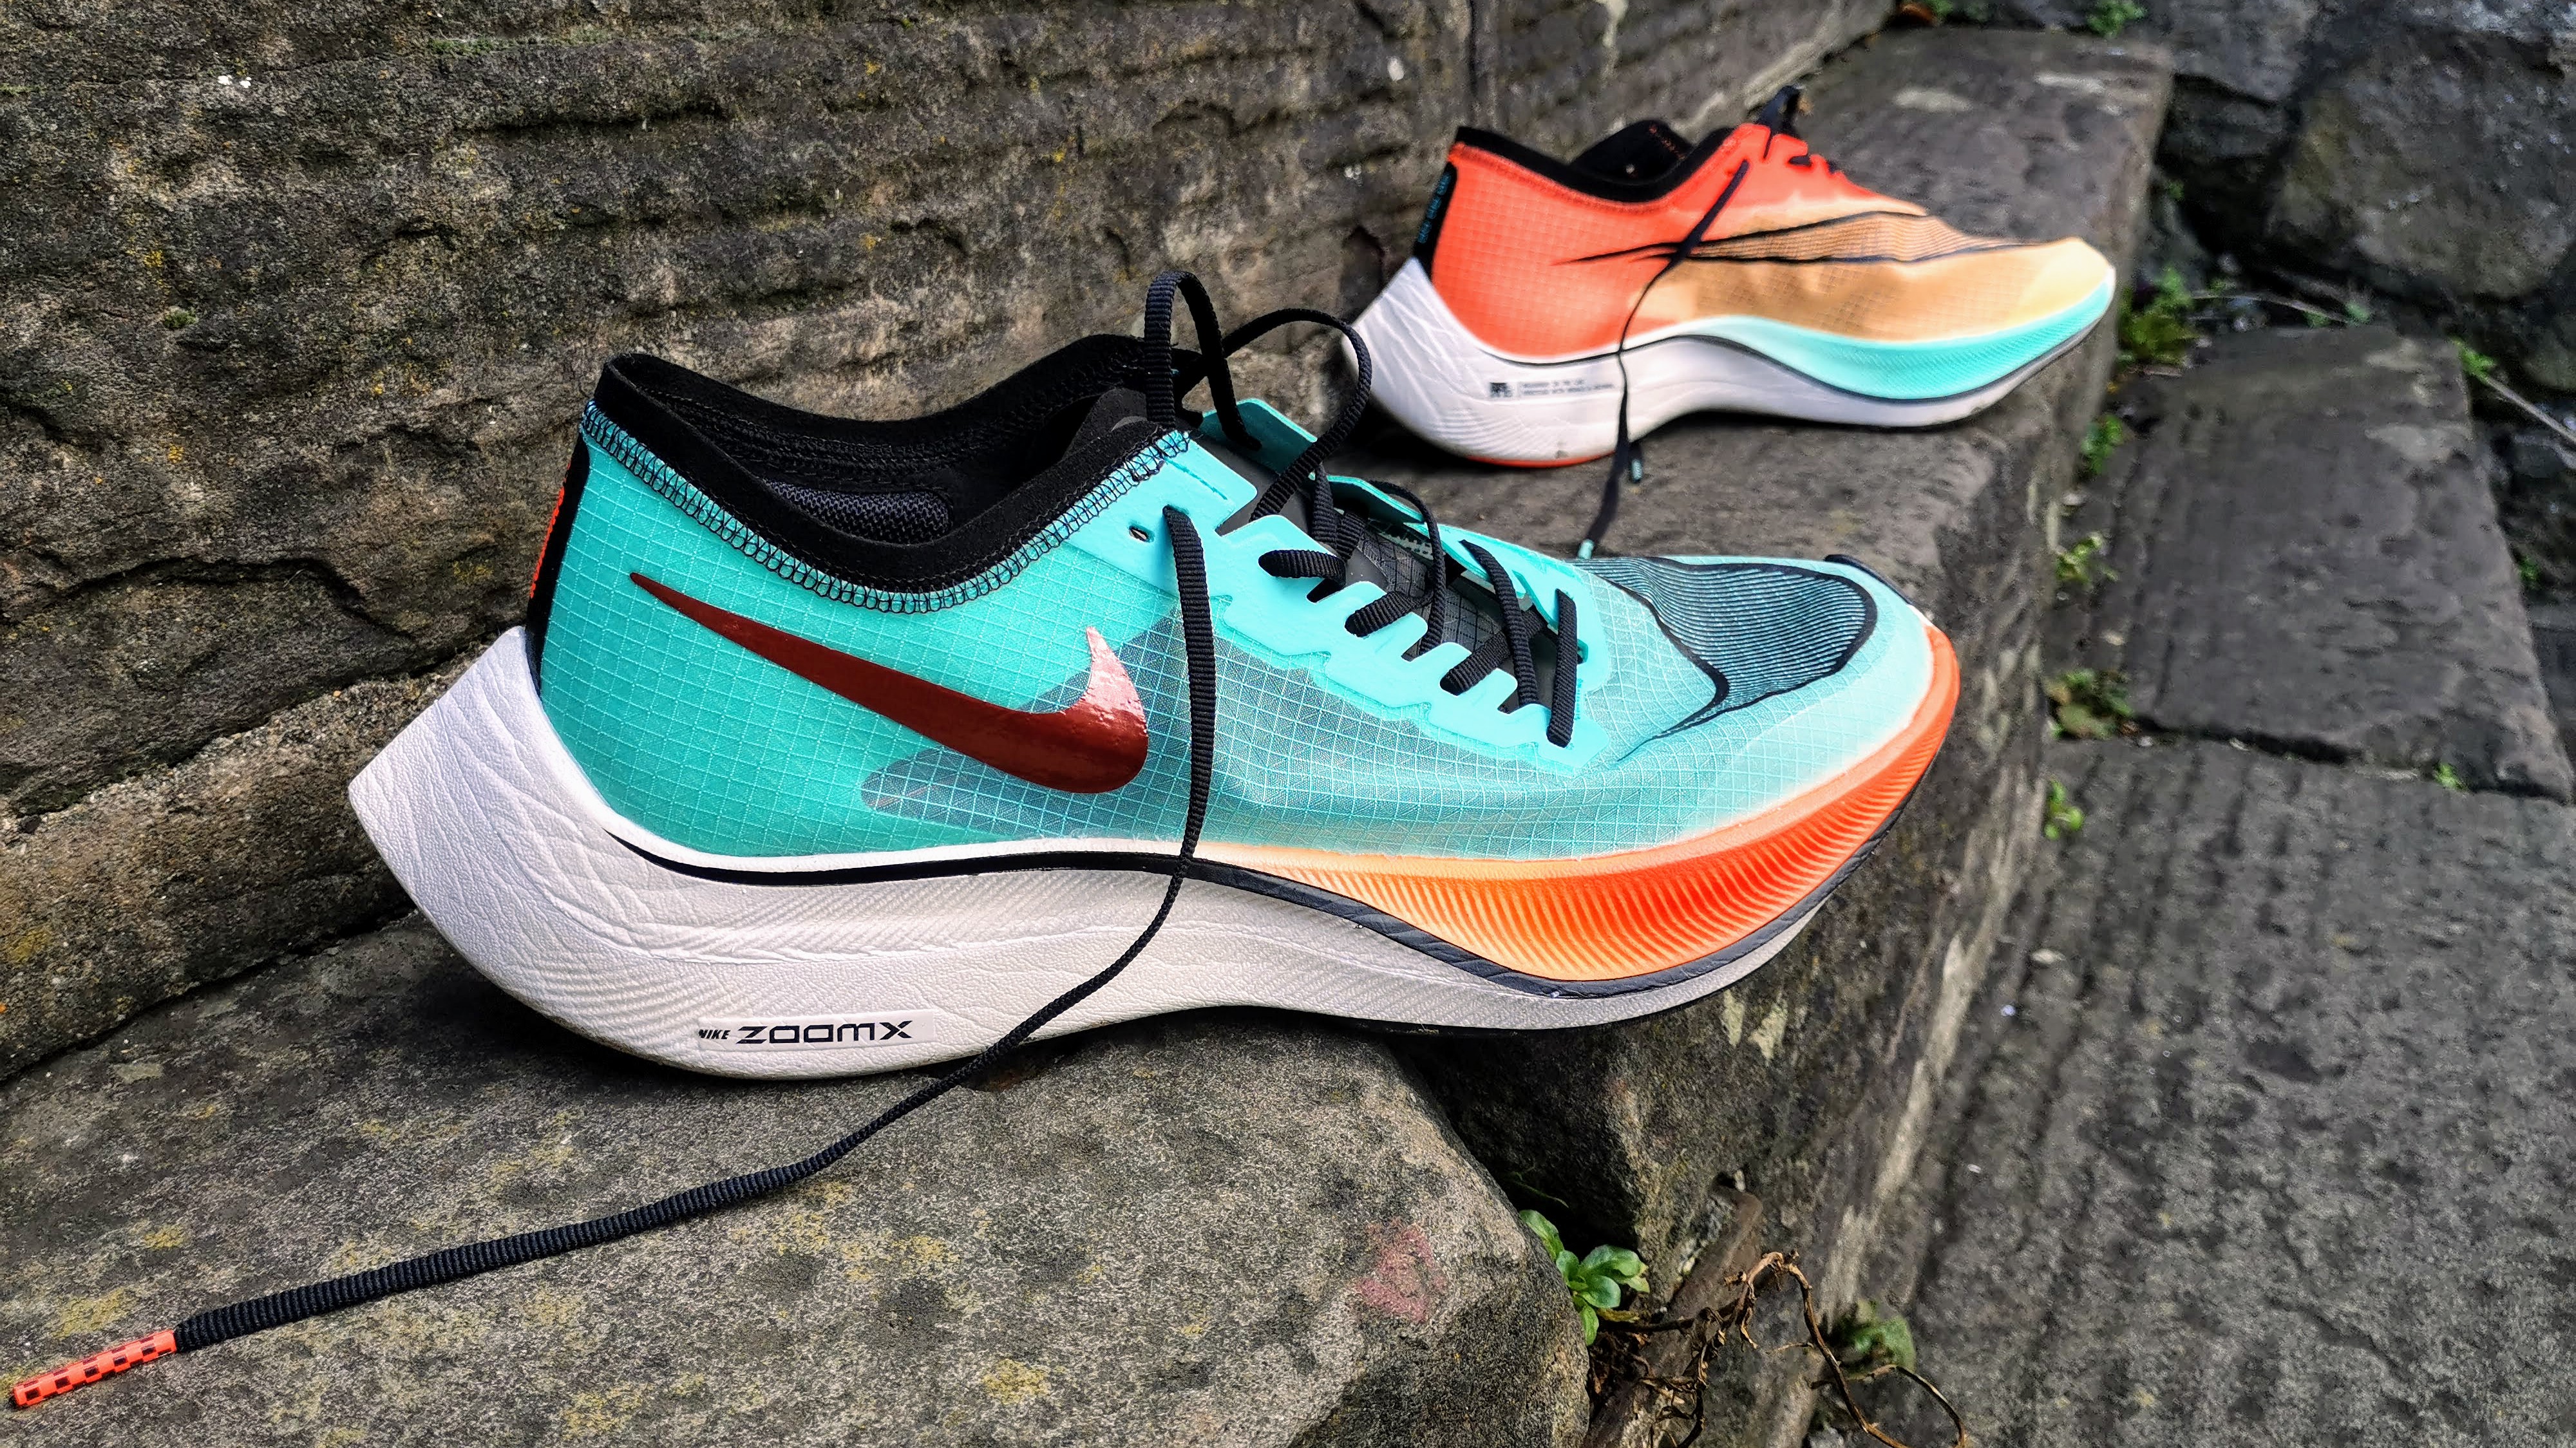 Nike Vaporfly NEXT% the hype | T3